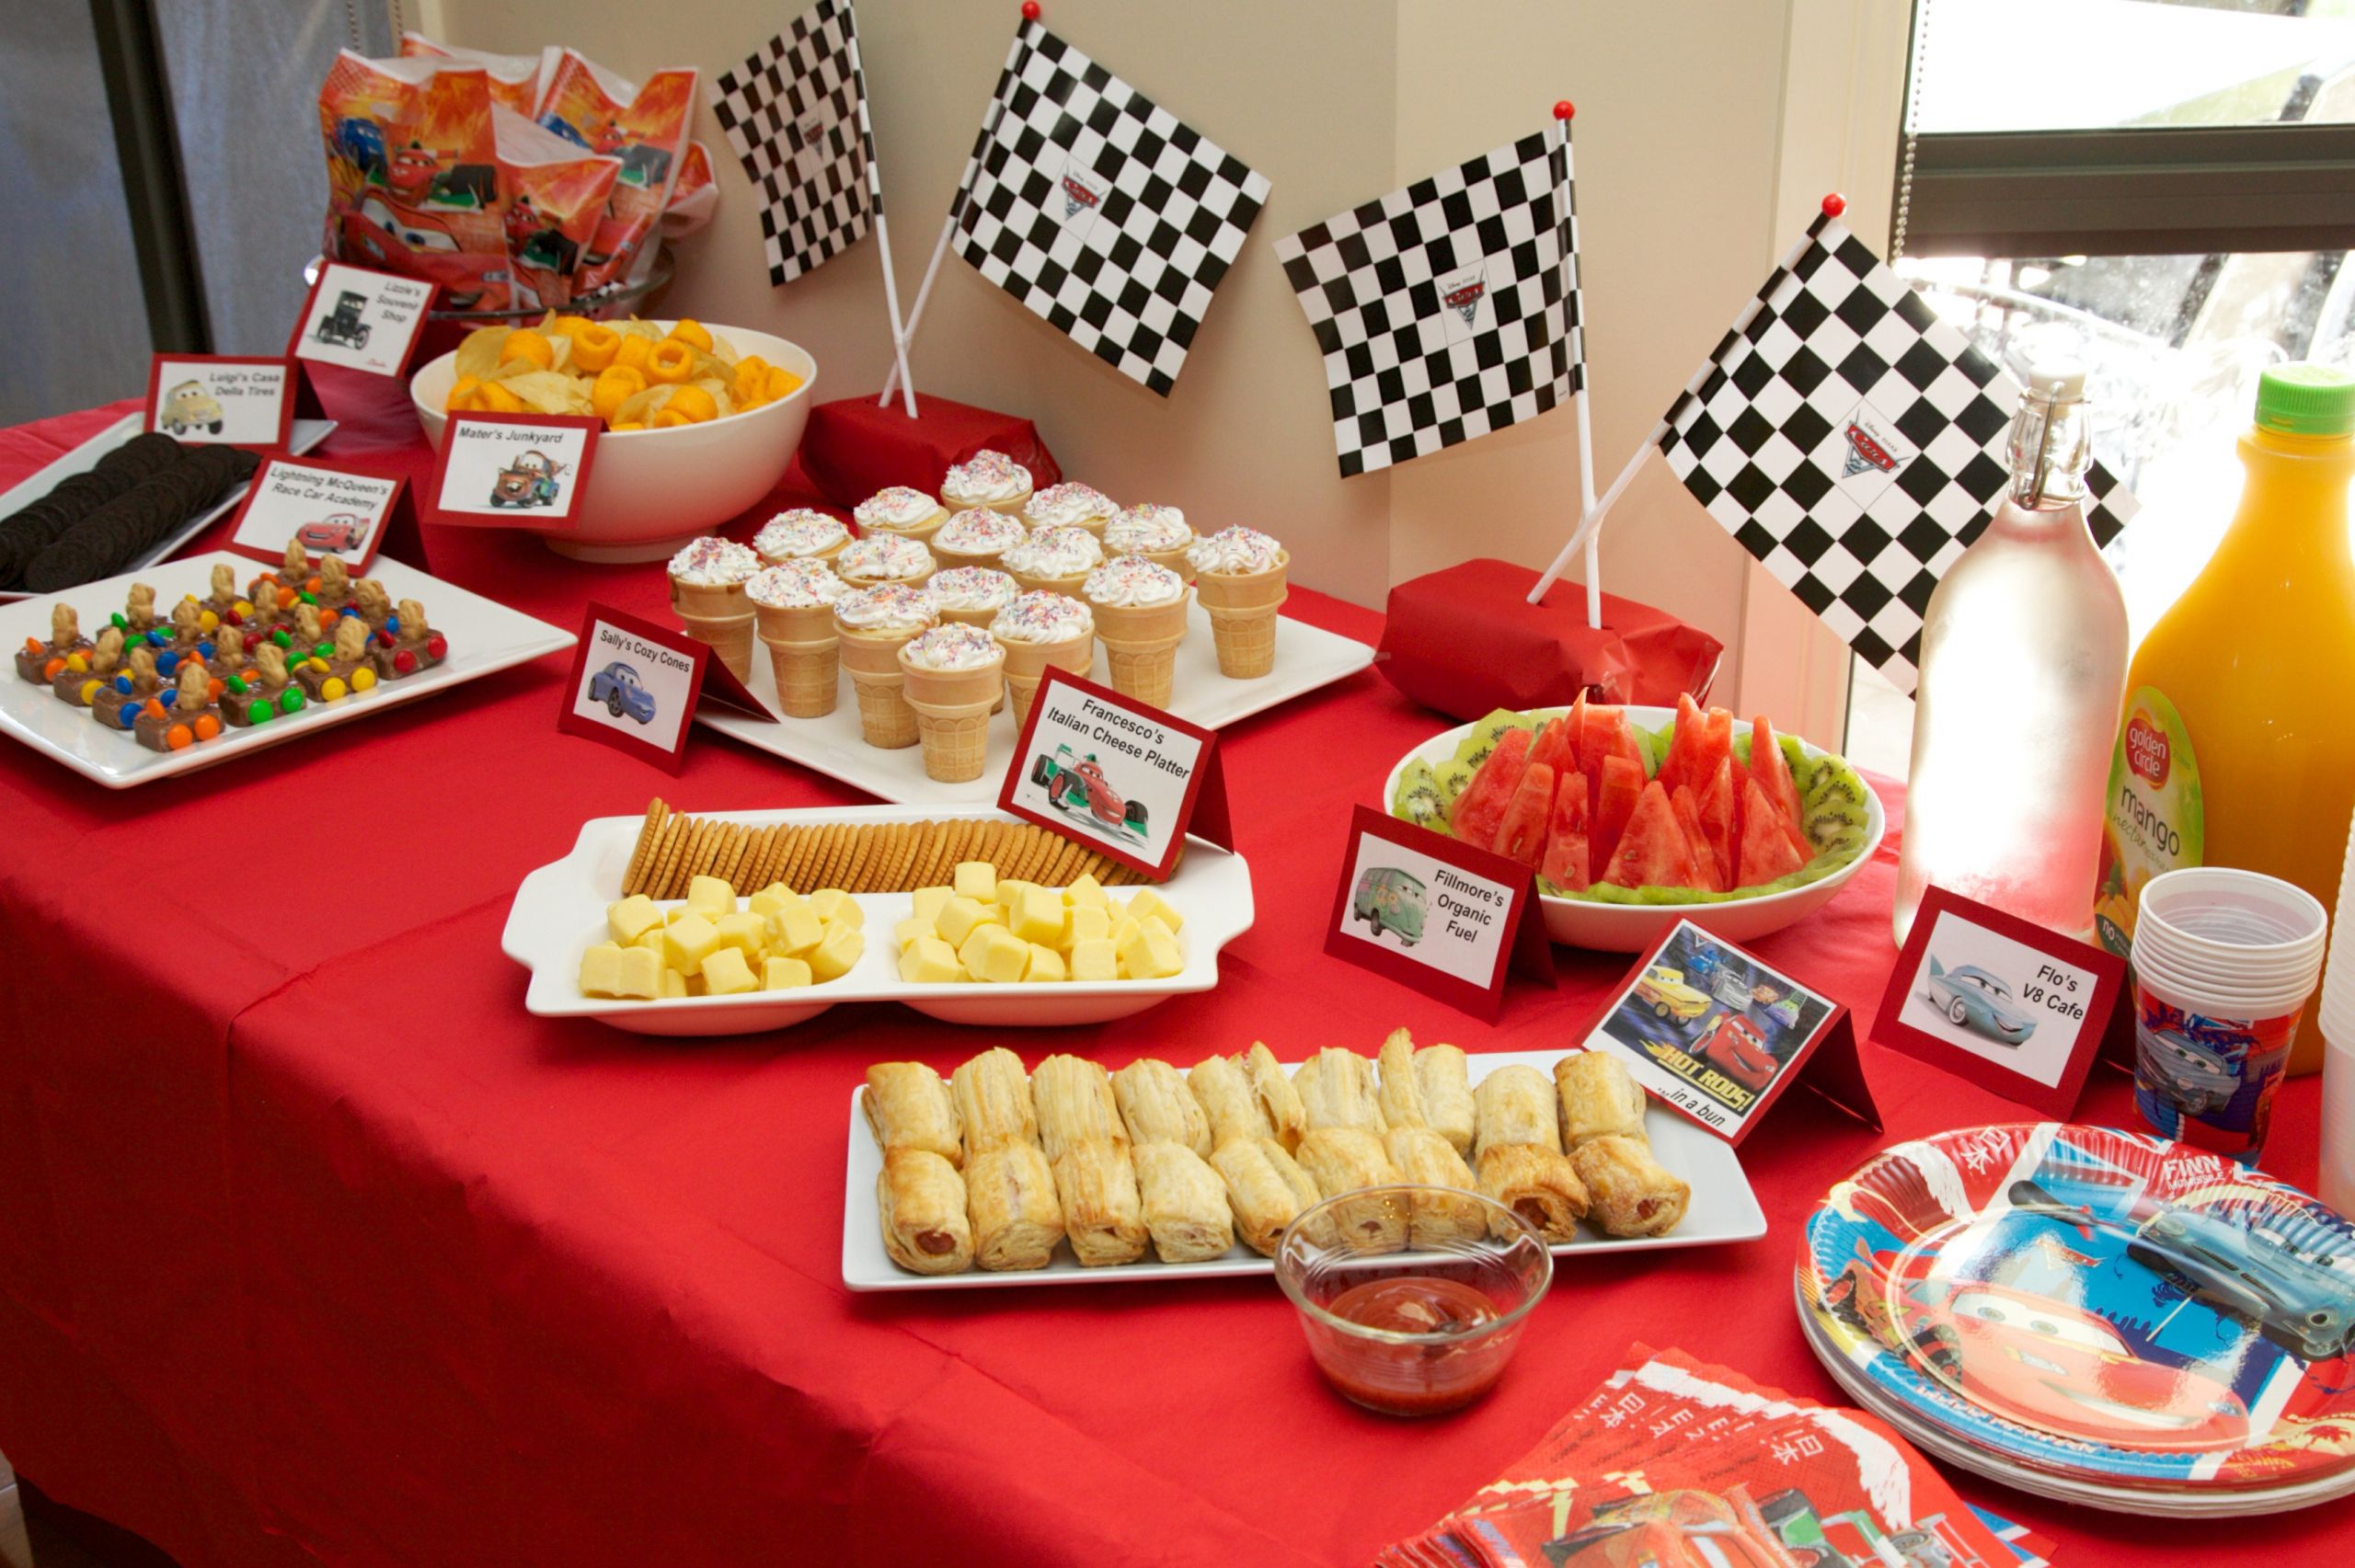 Birthday Party Menu Ideas
 How to throw a BIG kids birthday party on a small bud